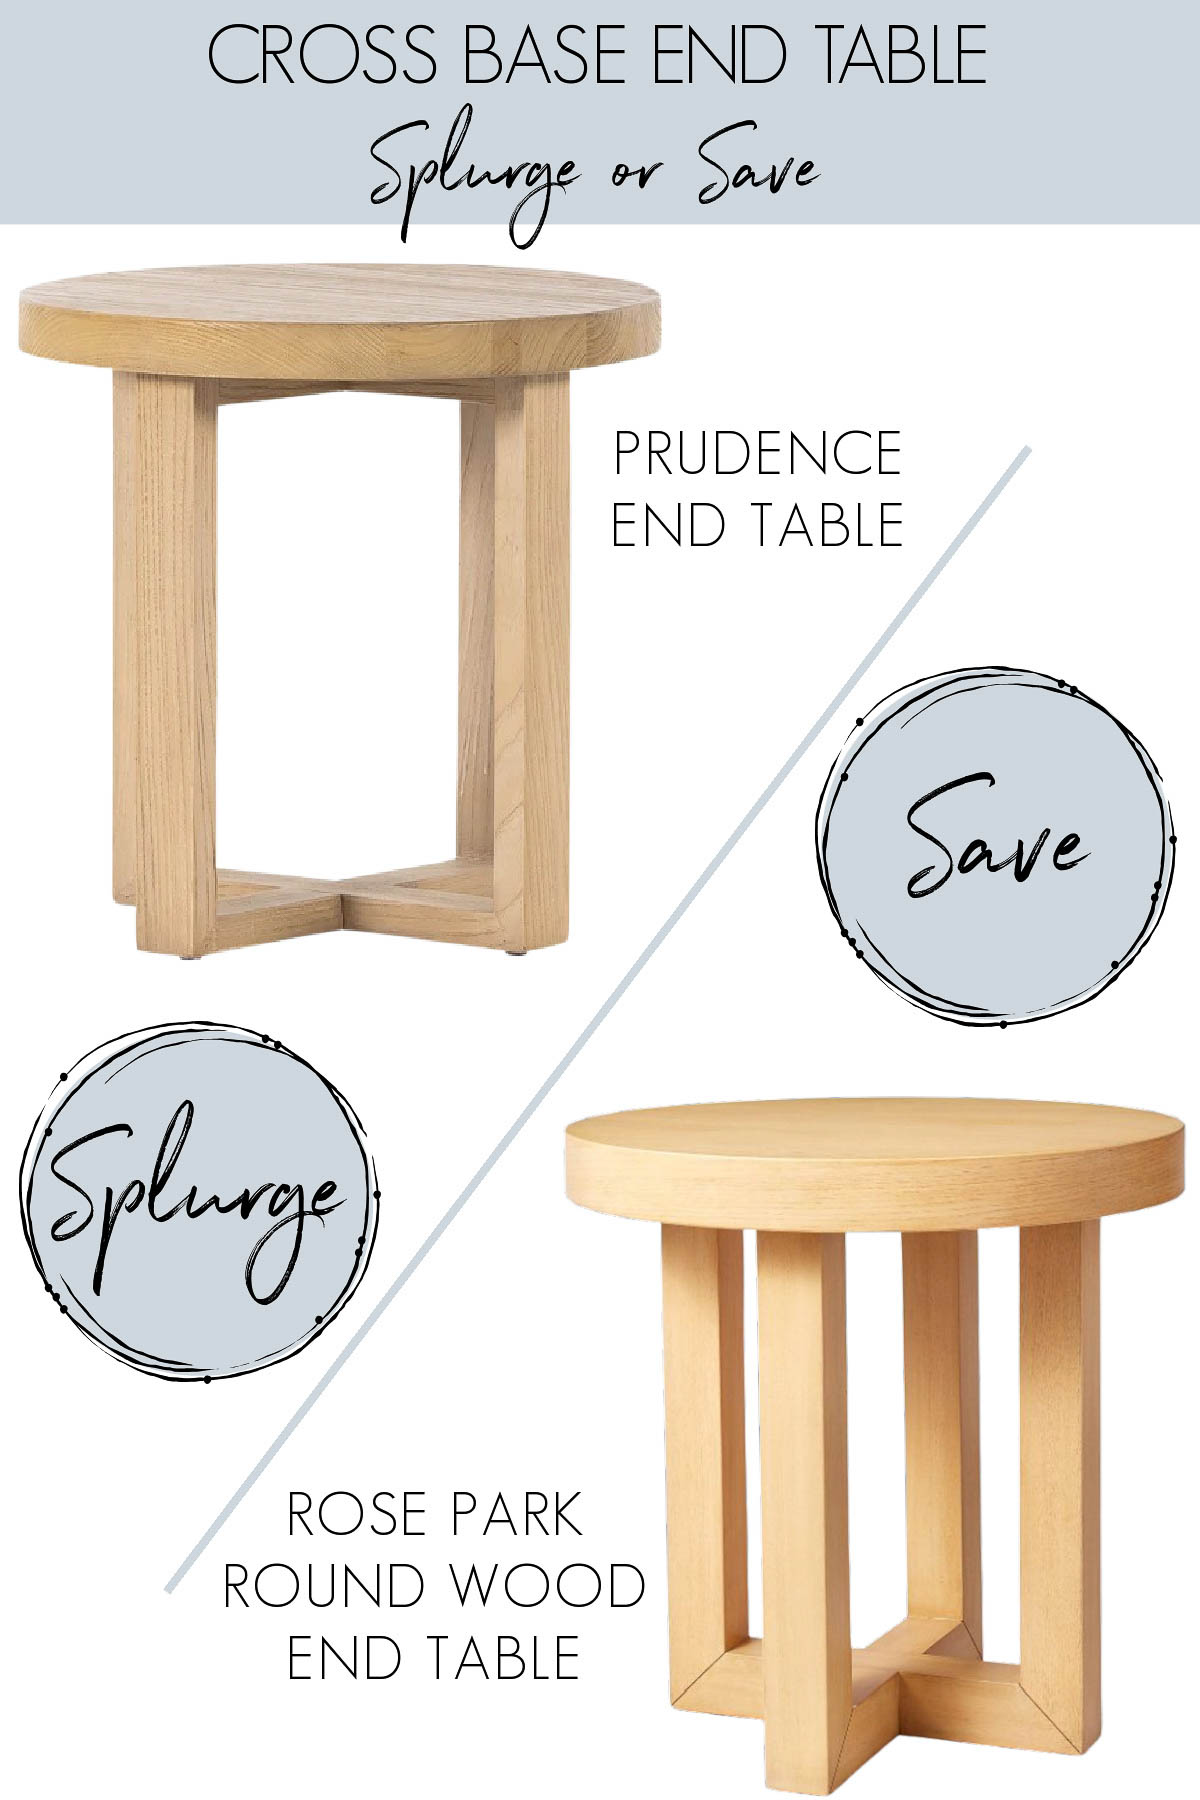 Simple side table in splurge and save versions